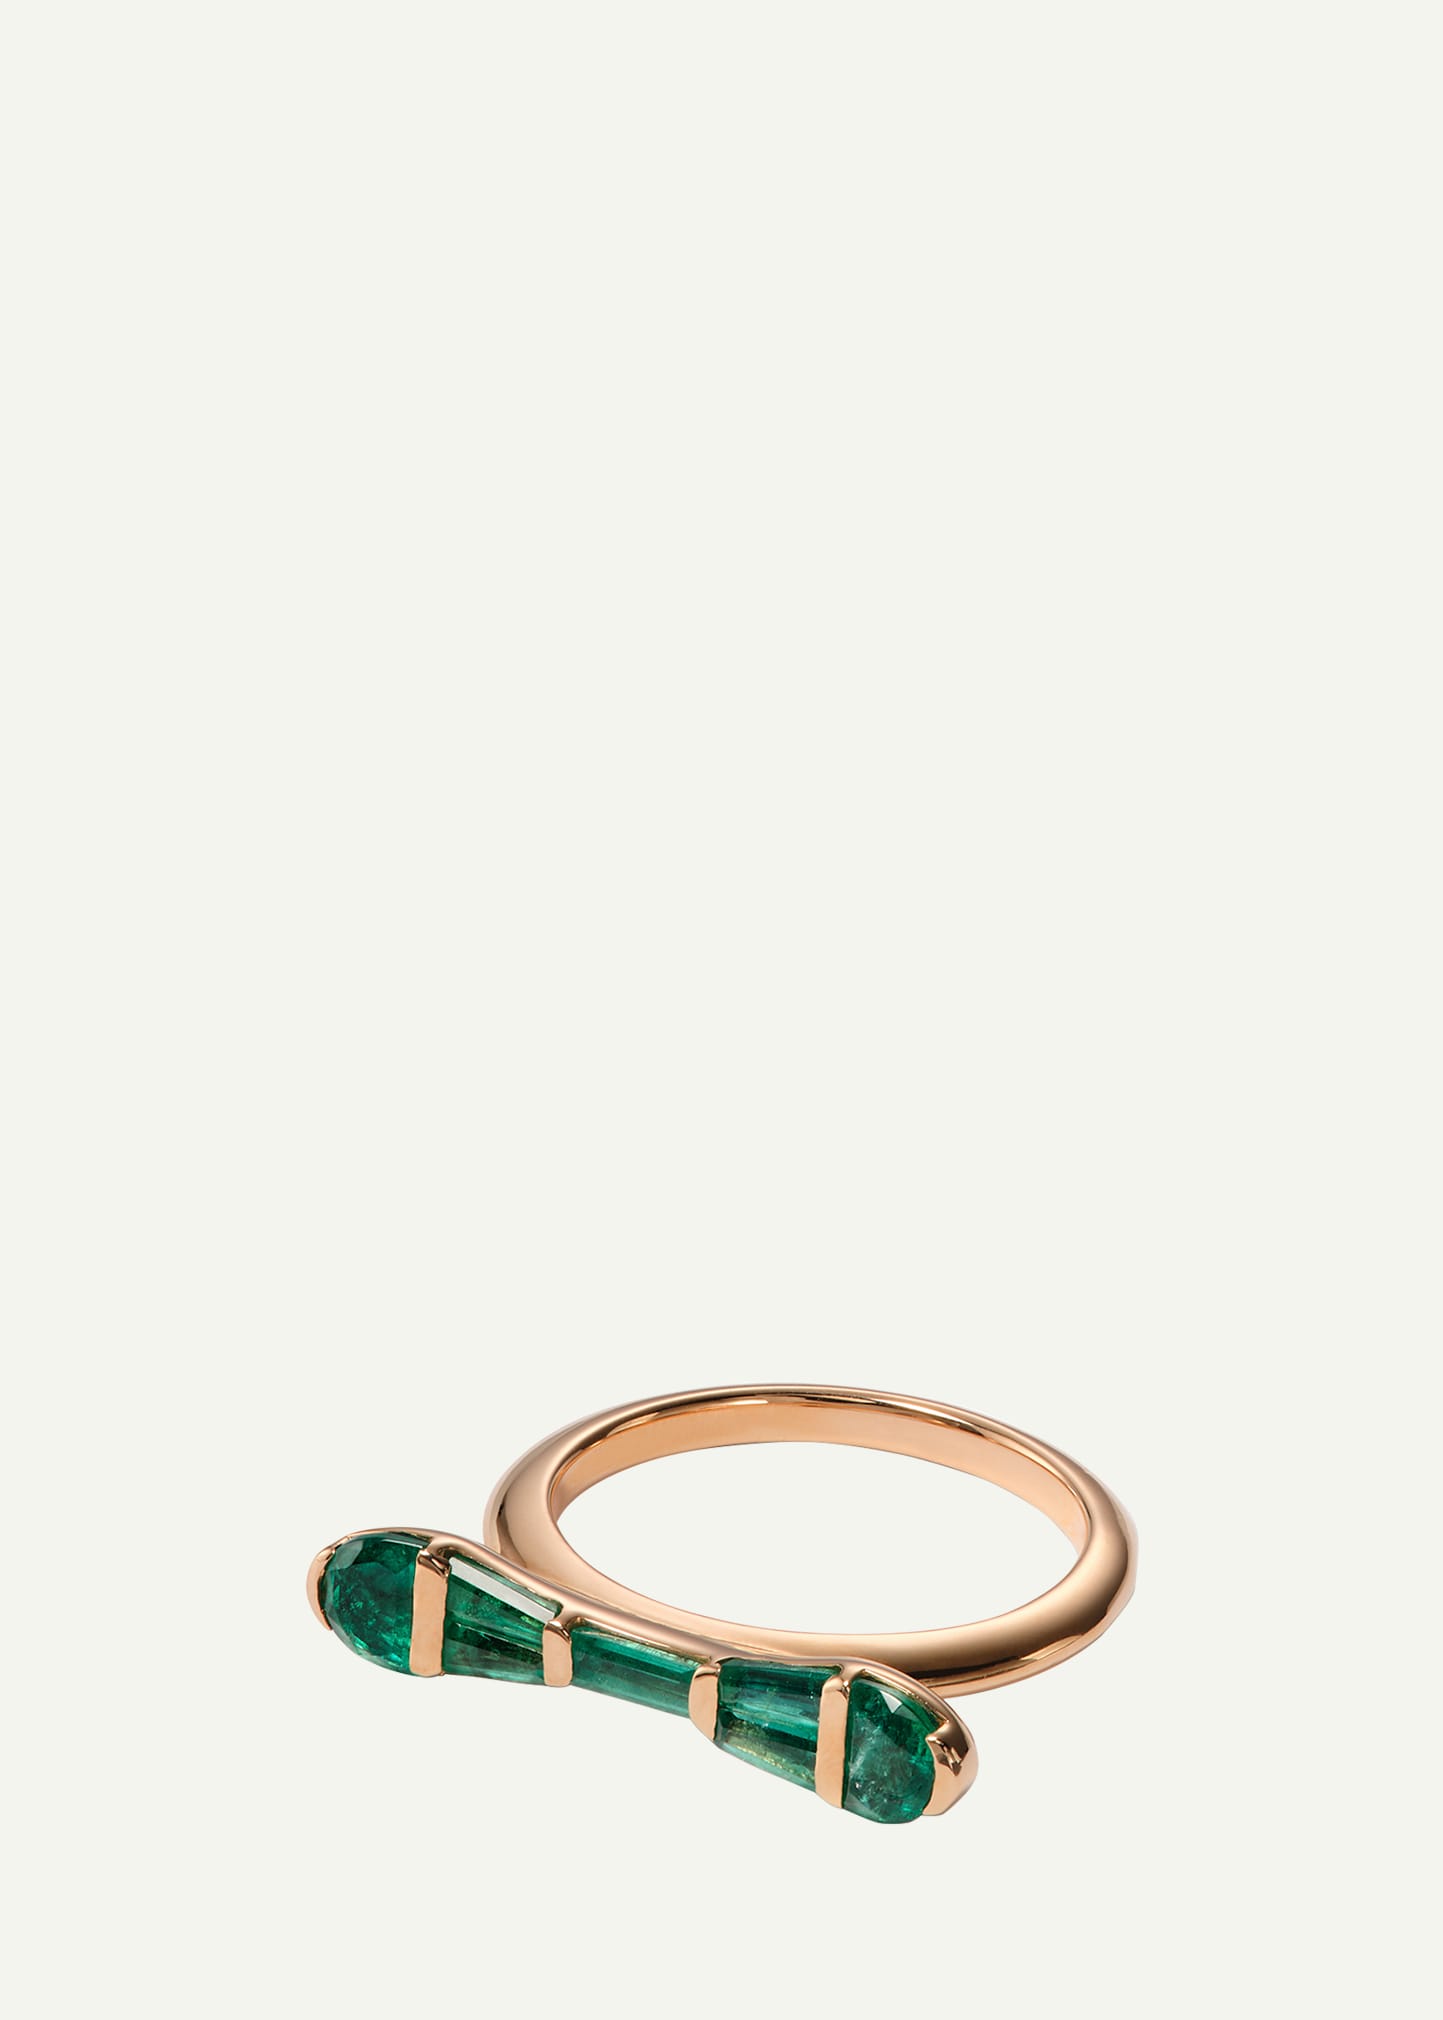 20K Rose Gold Baton Ring with Emeralds